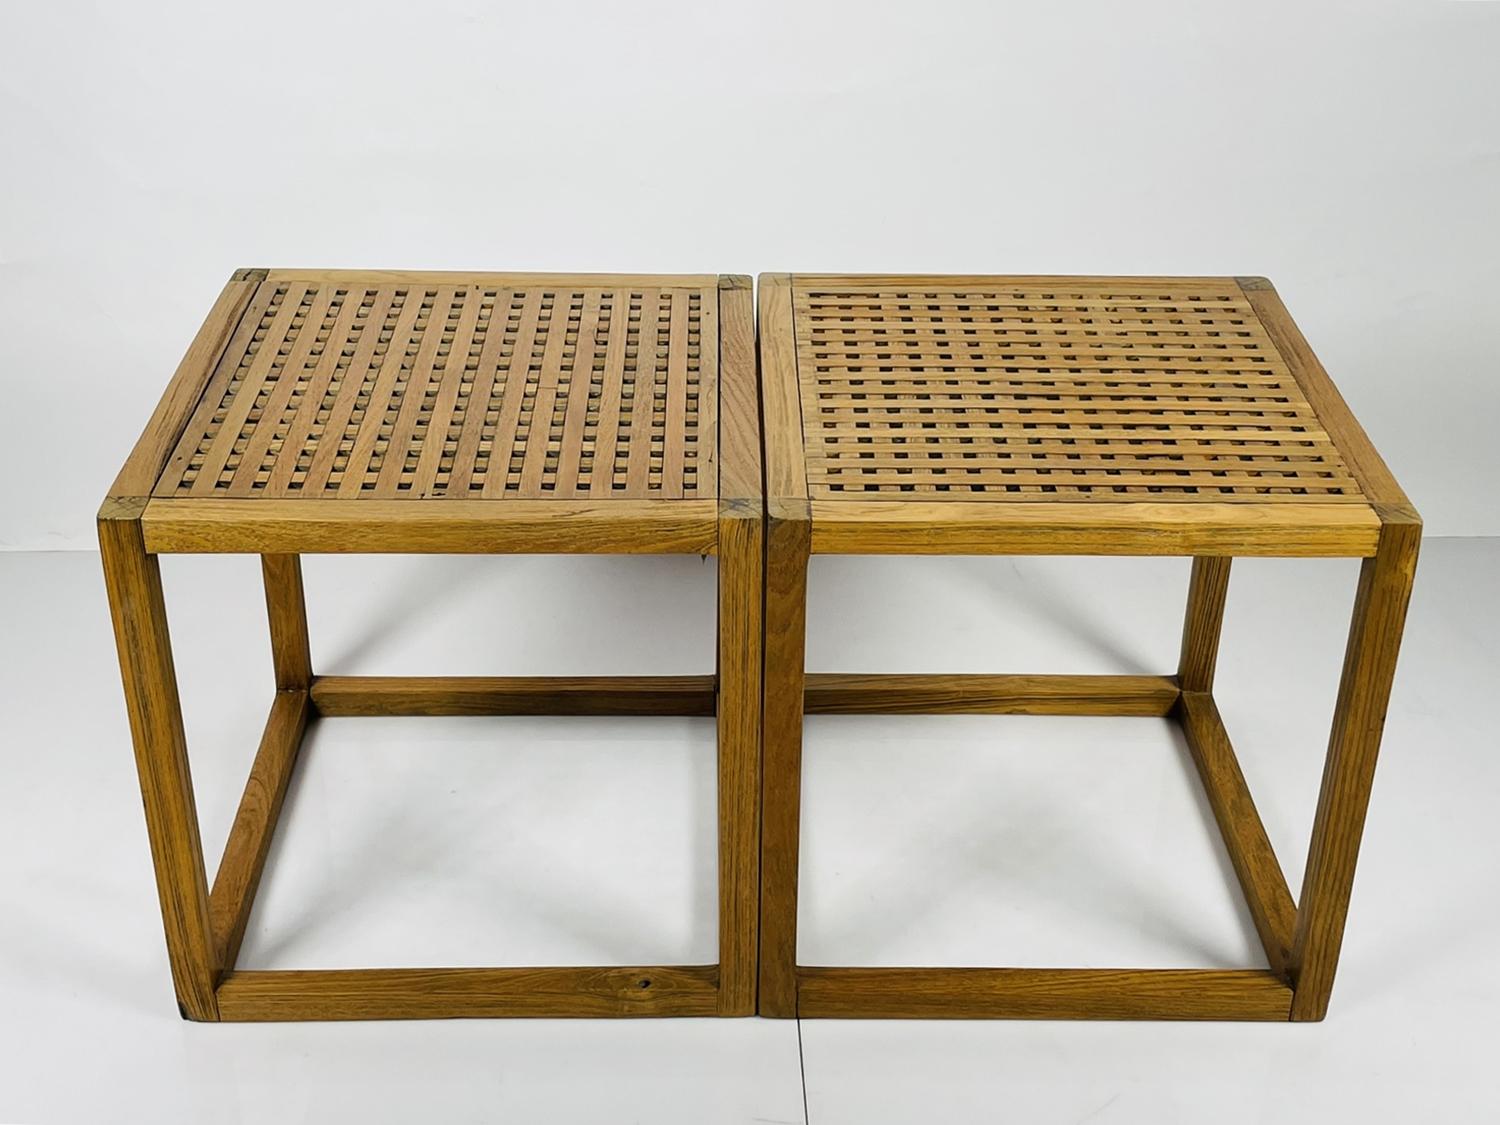 The Pair of Teak Lattice Cube Tables by Kipp Stewart for Summit Furniture are the perfect addition to any living space. These stunning square side tables feature a unique lattice style top design that adds texture and visual interest to your decor.